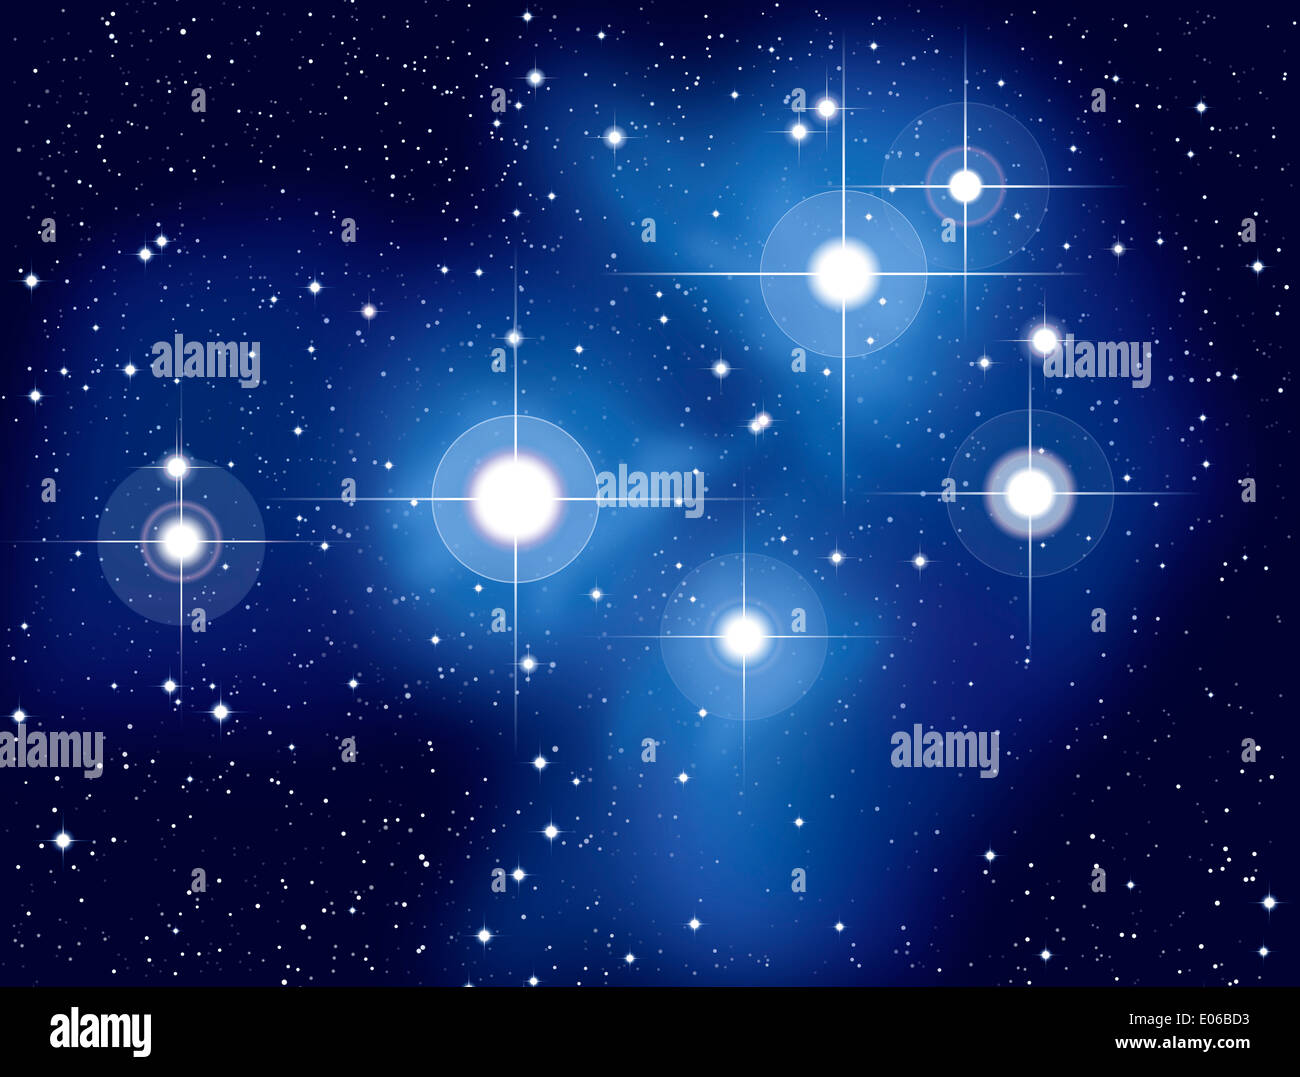 Pleiades - Illustration of the Pleiades, called Seven Sisters, M45, an open star cluster located in the constellation of Taurus. Stock Photo